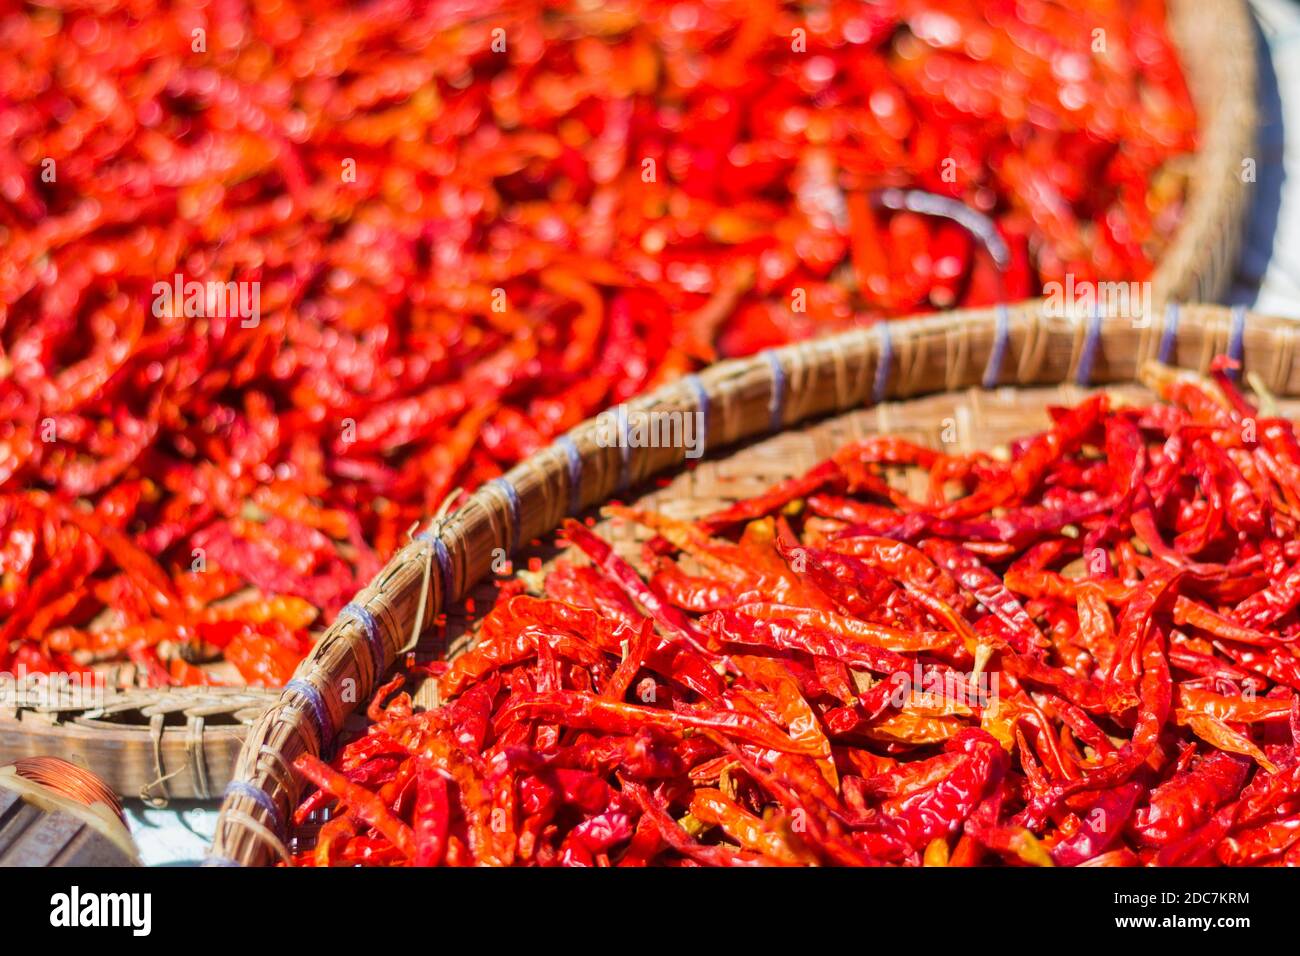 Red chili peppers drying in Phuket, Thailand Stock Photo